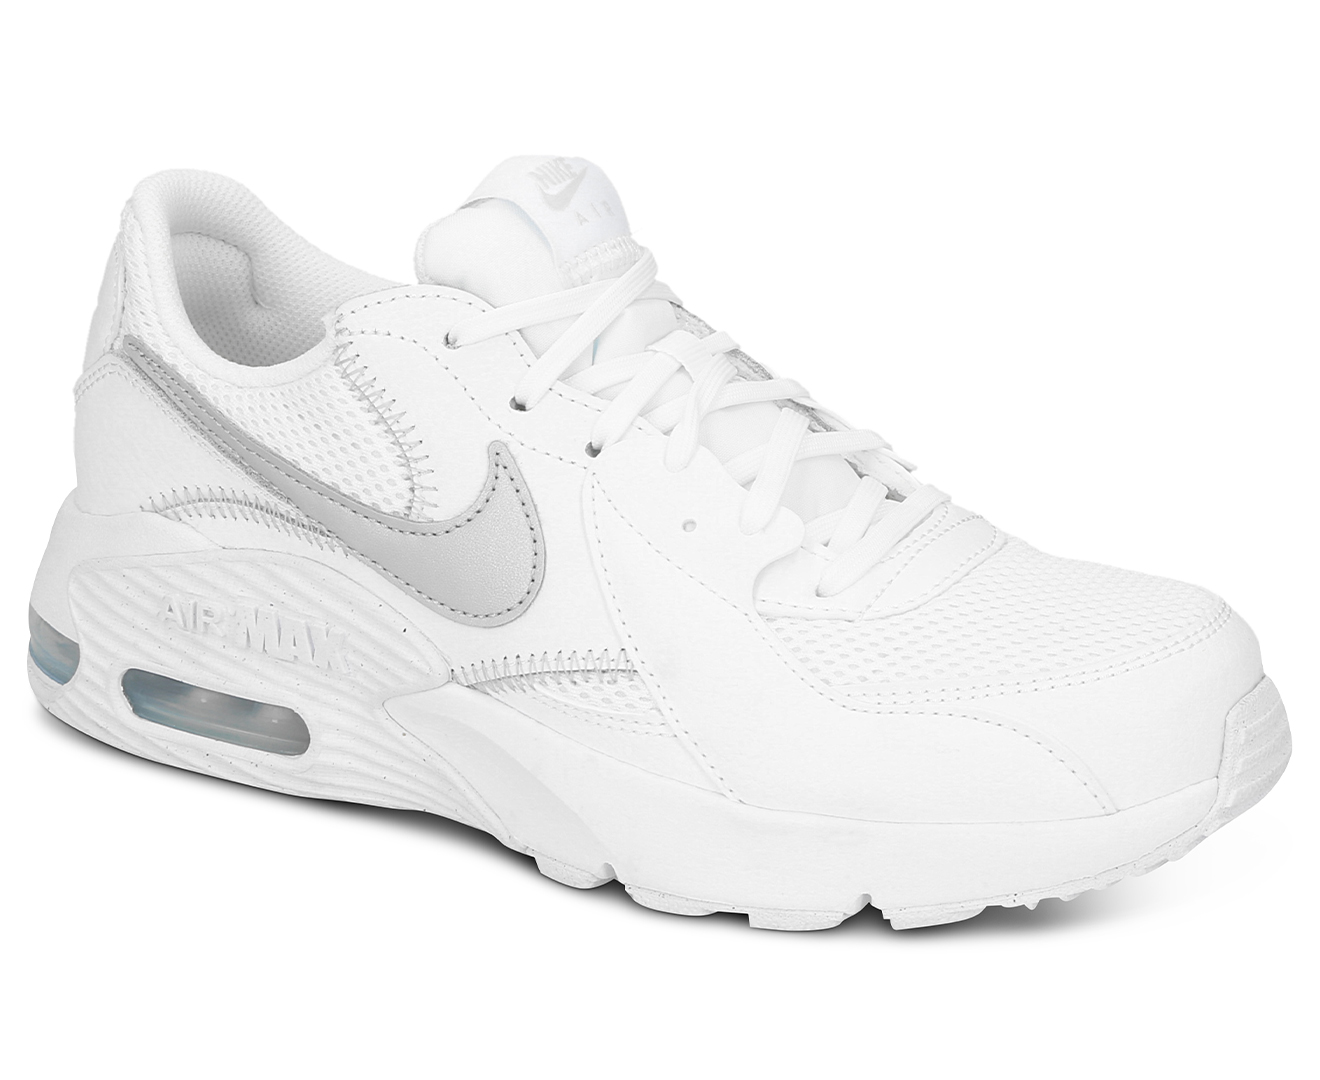 Nike Women's Air Max Excee Sneakers - White/Metallic Platinum | Catch.co.nz